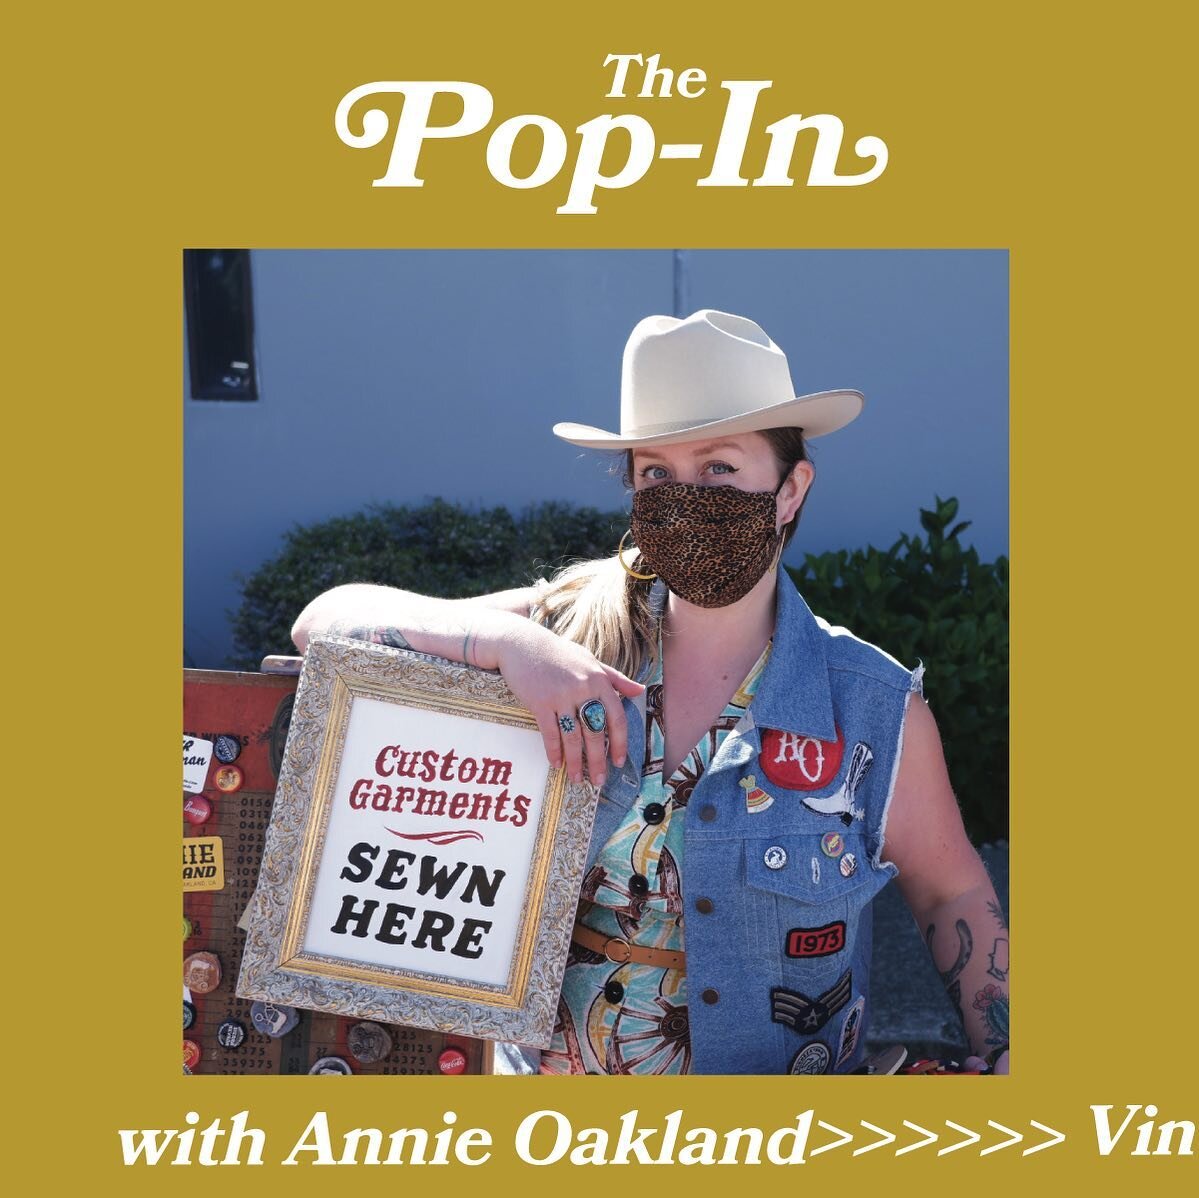 This Friday @annieoaklandmade will be popping by with her vintage inspired and bespoke garments!! Come by to check out the talents of Annie Oakland first hand! She makes garments, bags, tea towels and more the old fashioned way to last! 
.
Personal p